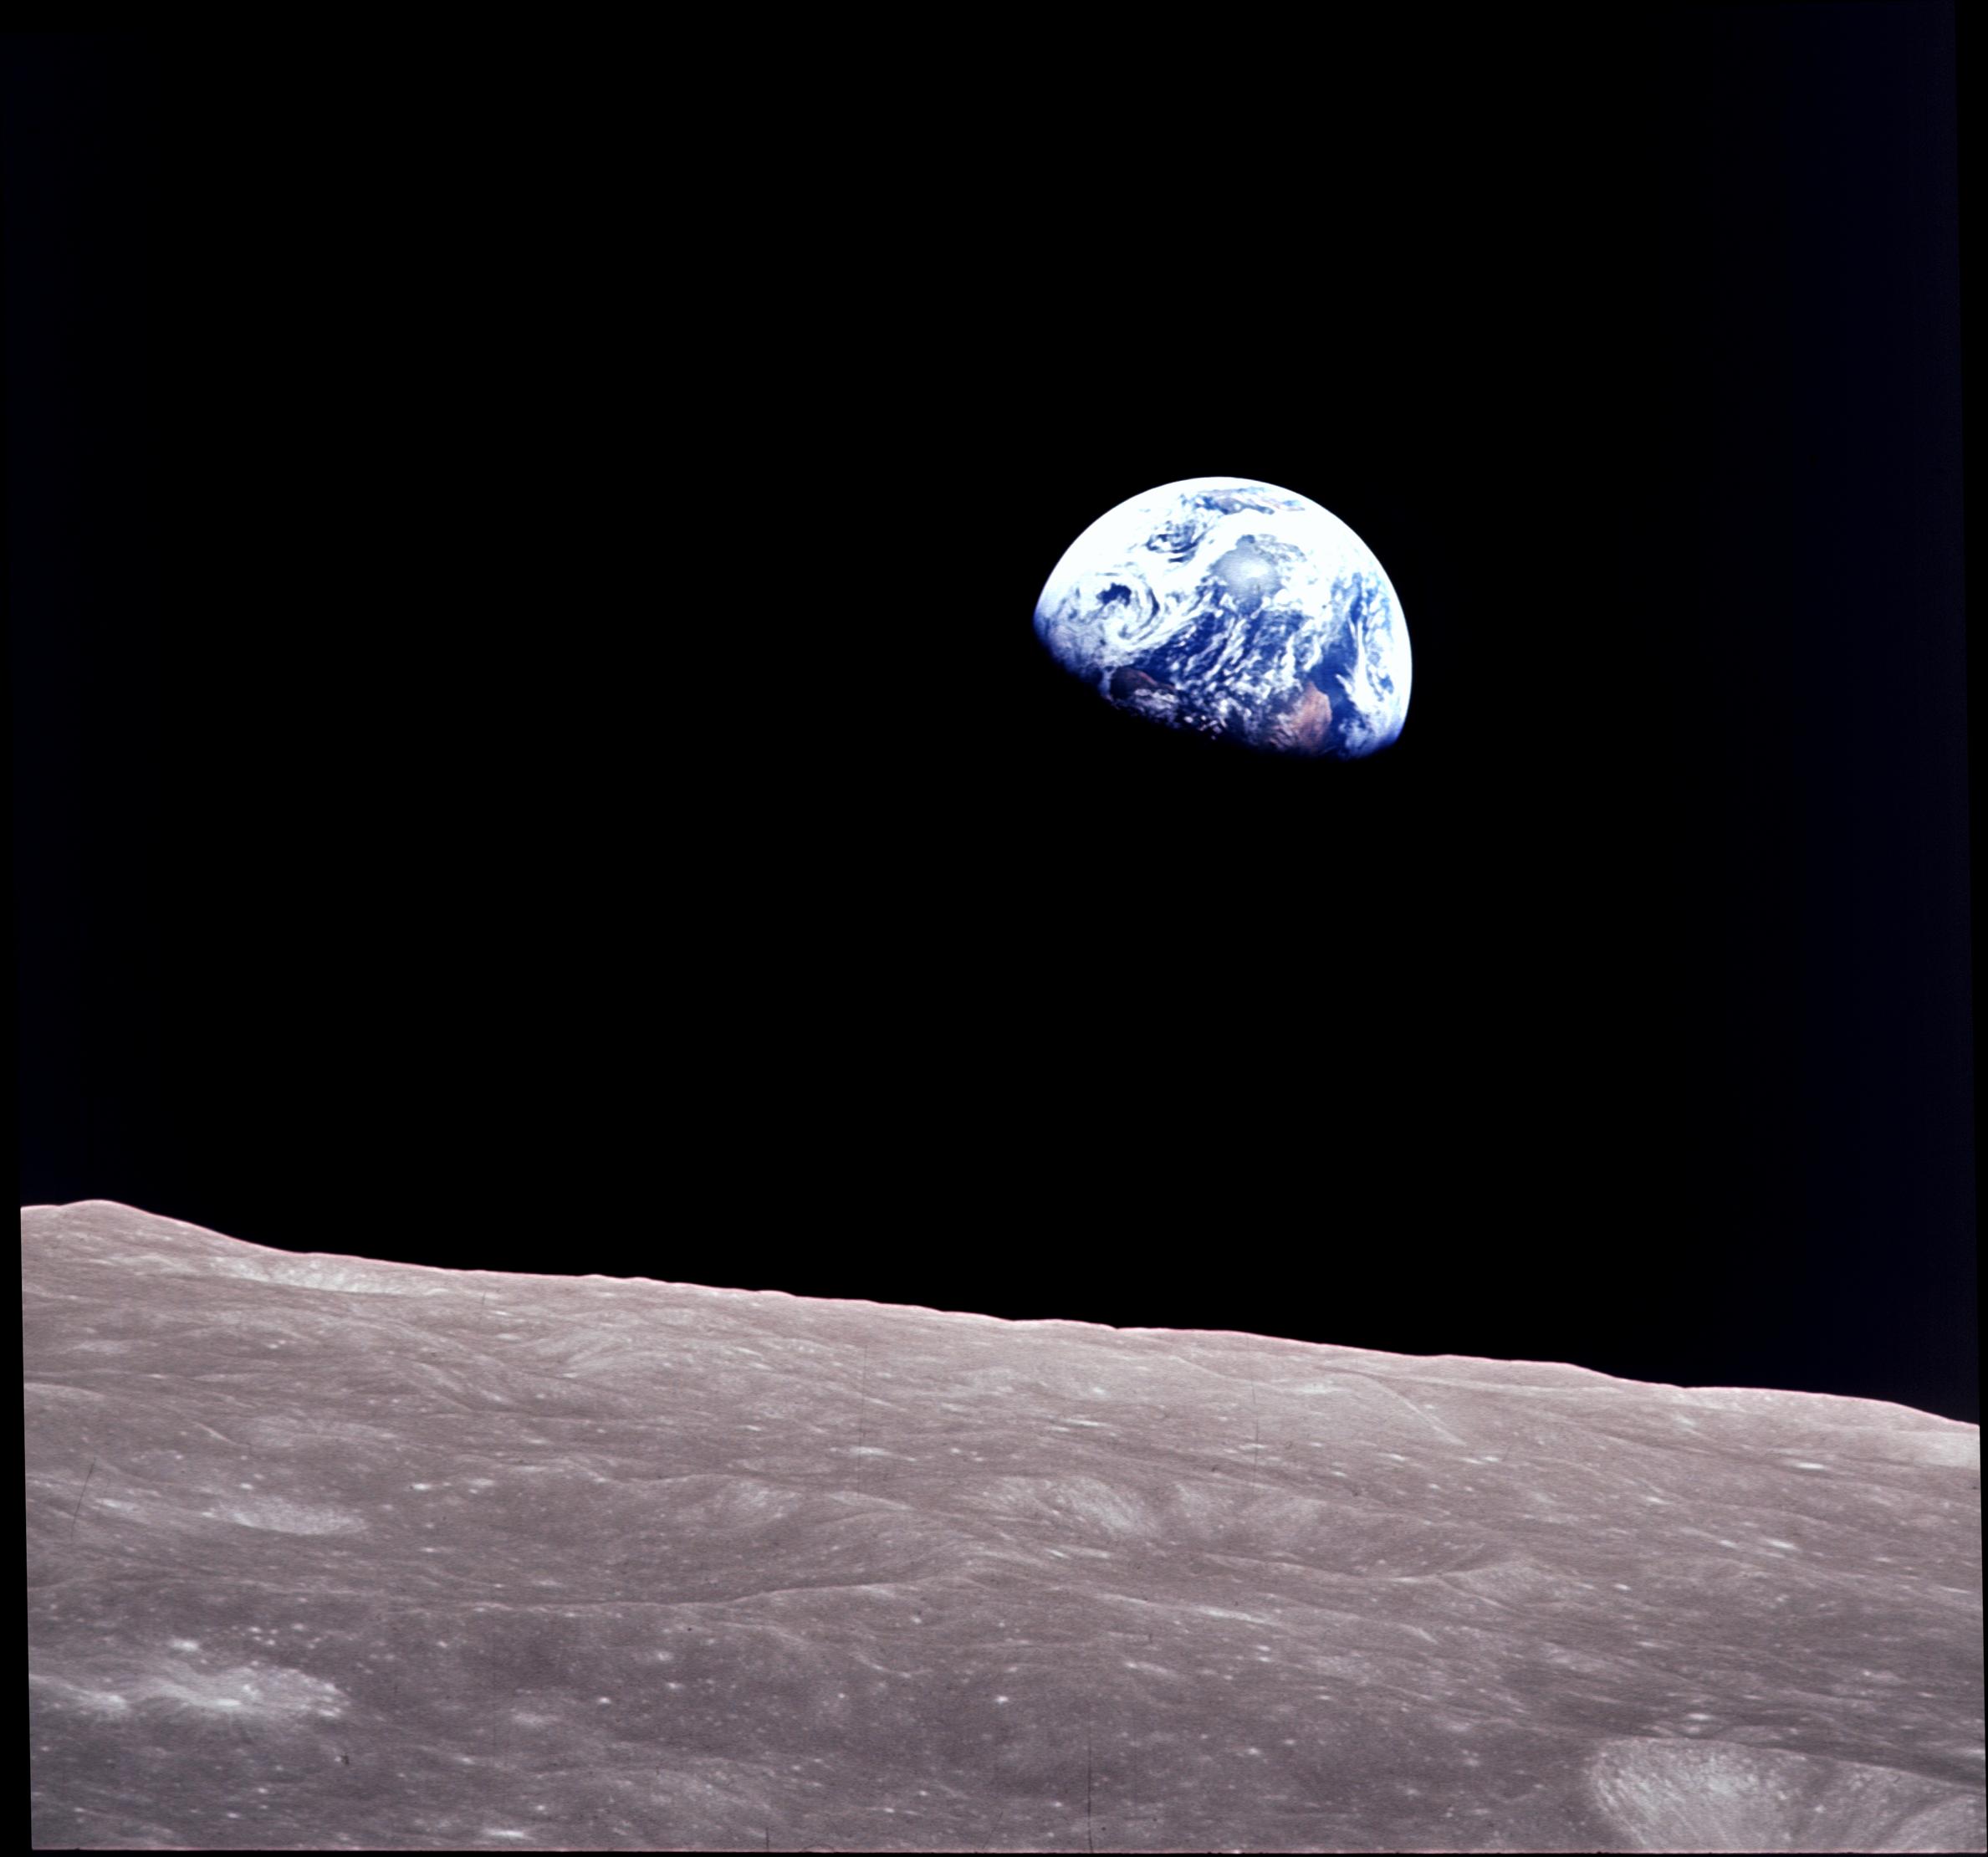 The rising Earth is about five degrees above the lunar horizon in this telephoto view taken from the Apollo 8 spacecraft.